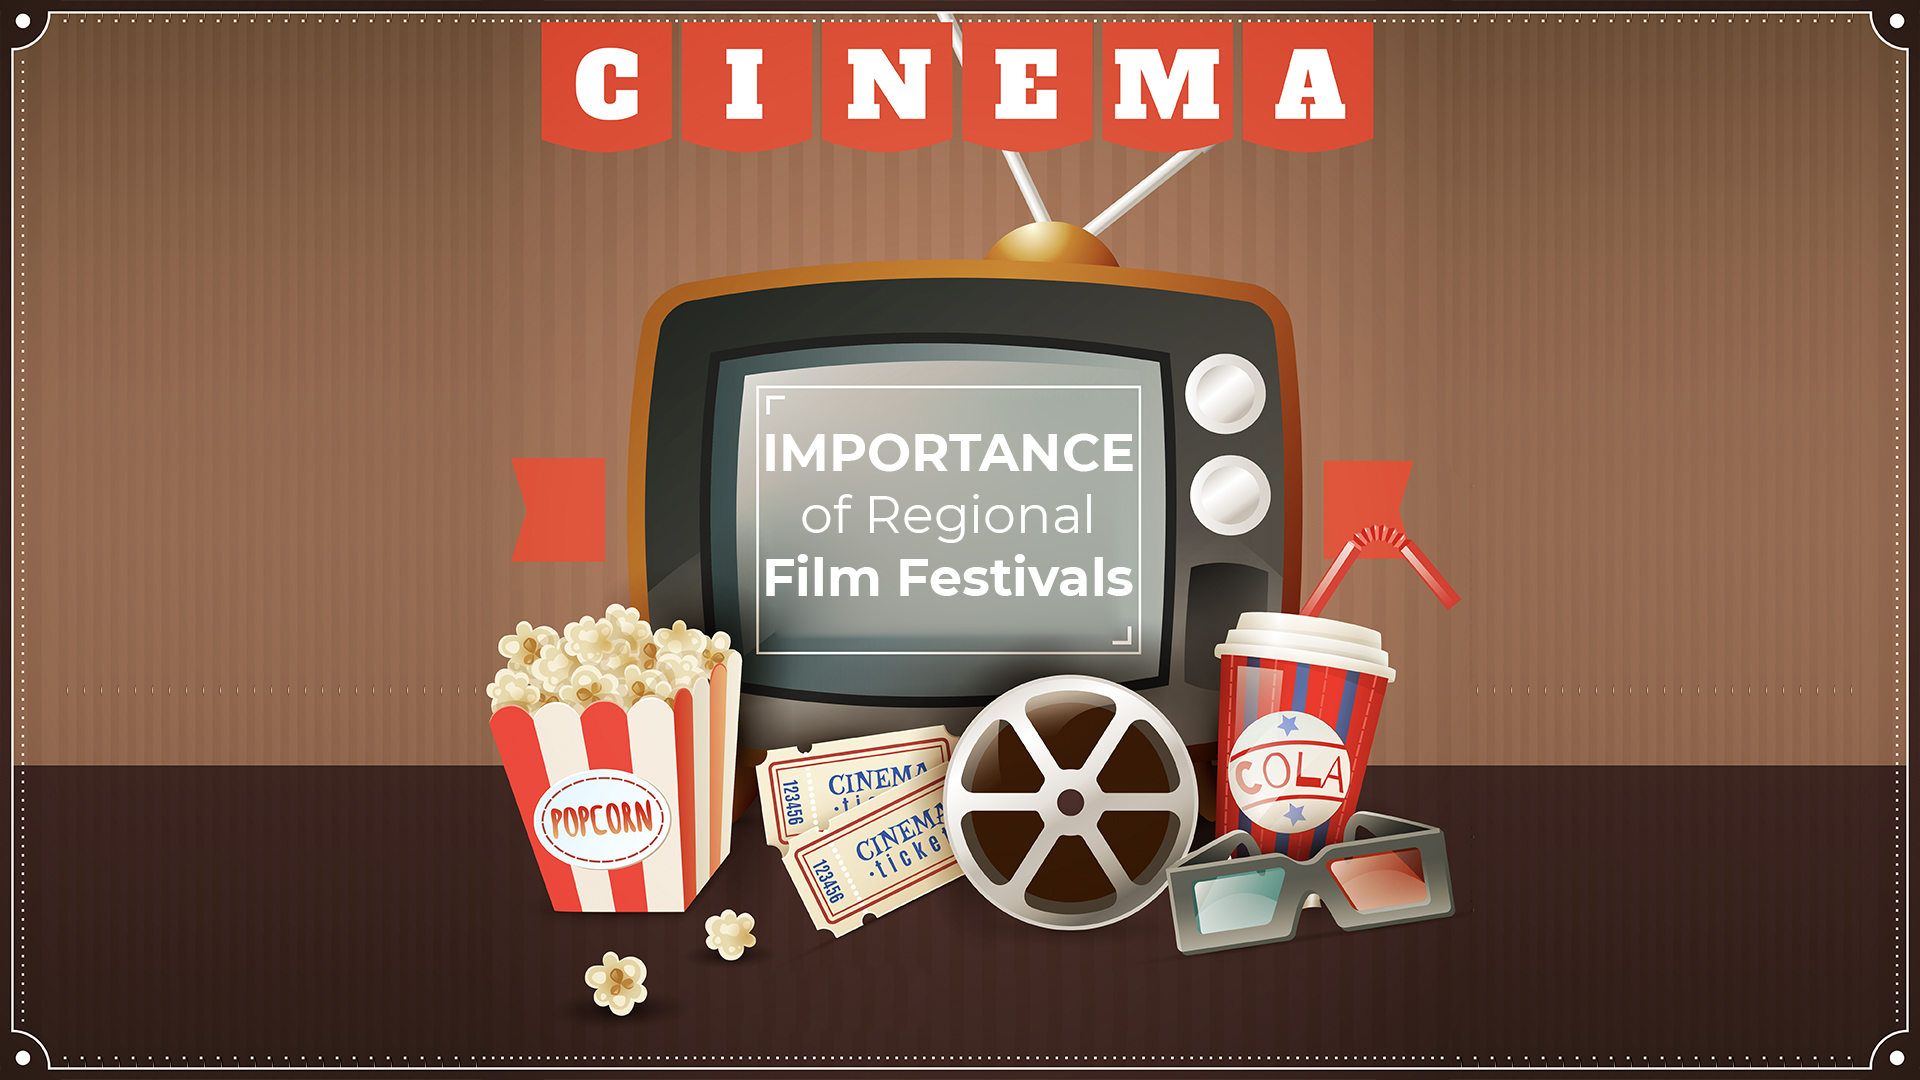 What is the importance of regional Film Festivals?